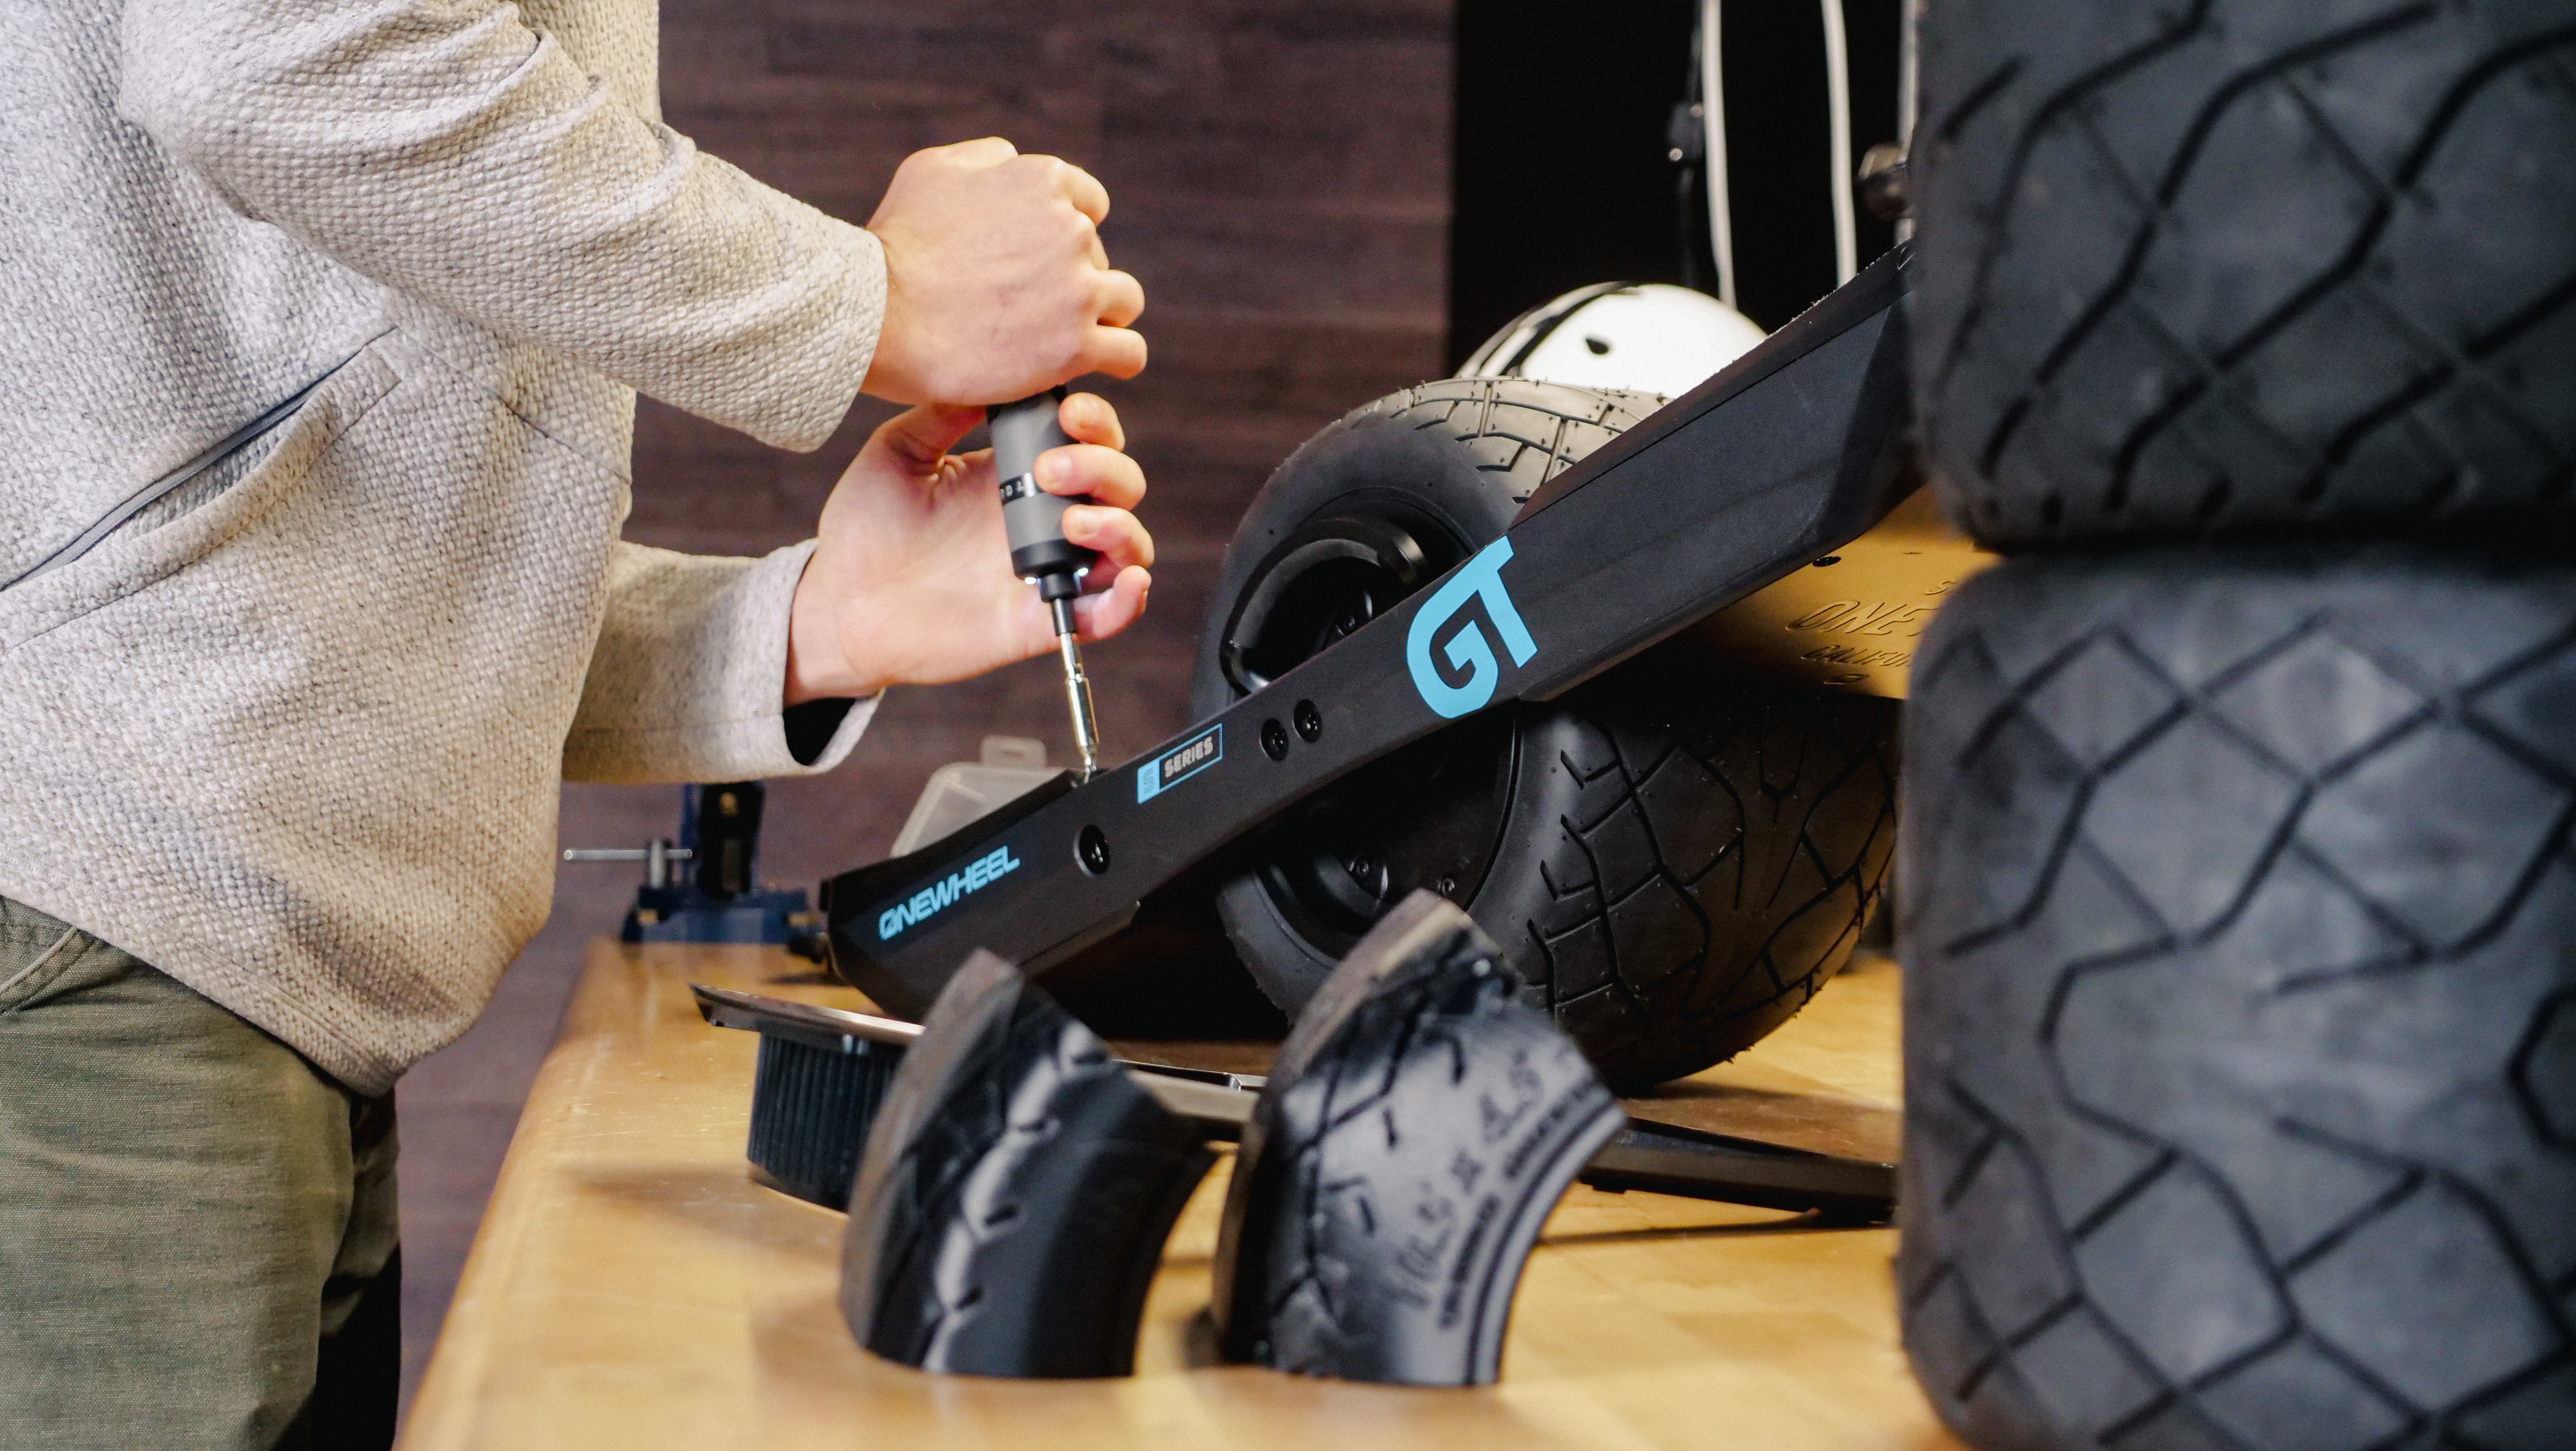 Onewheel GT S-Series Adds Some Giddyup to Your Land Shredding